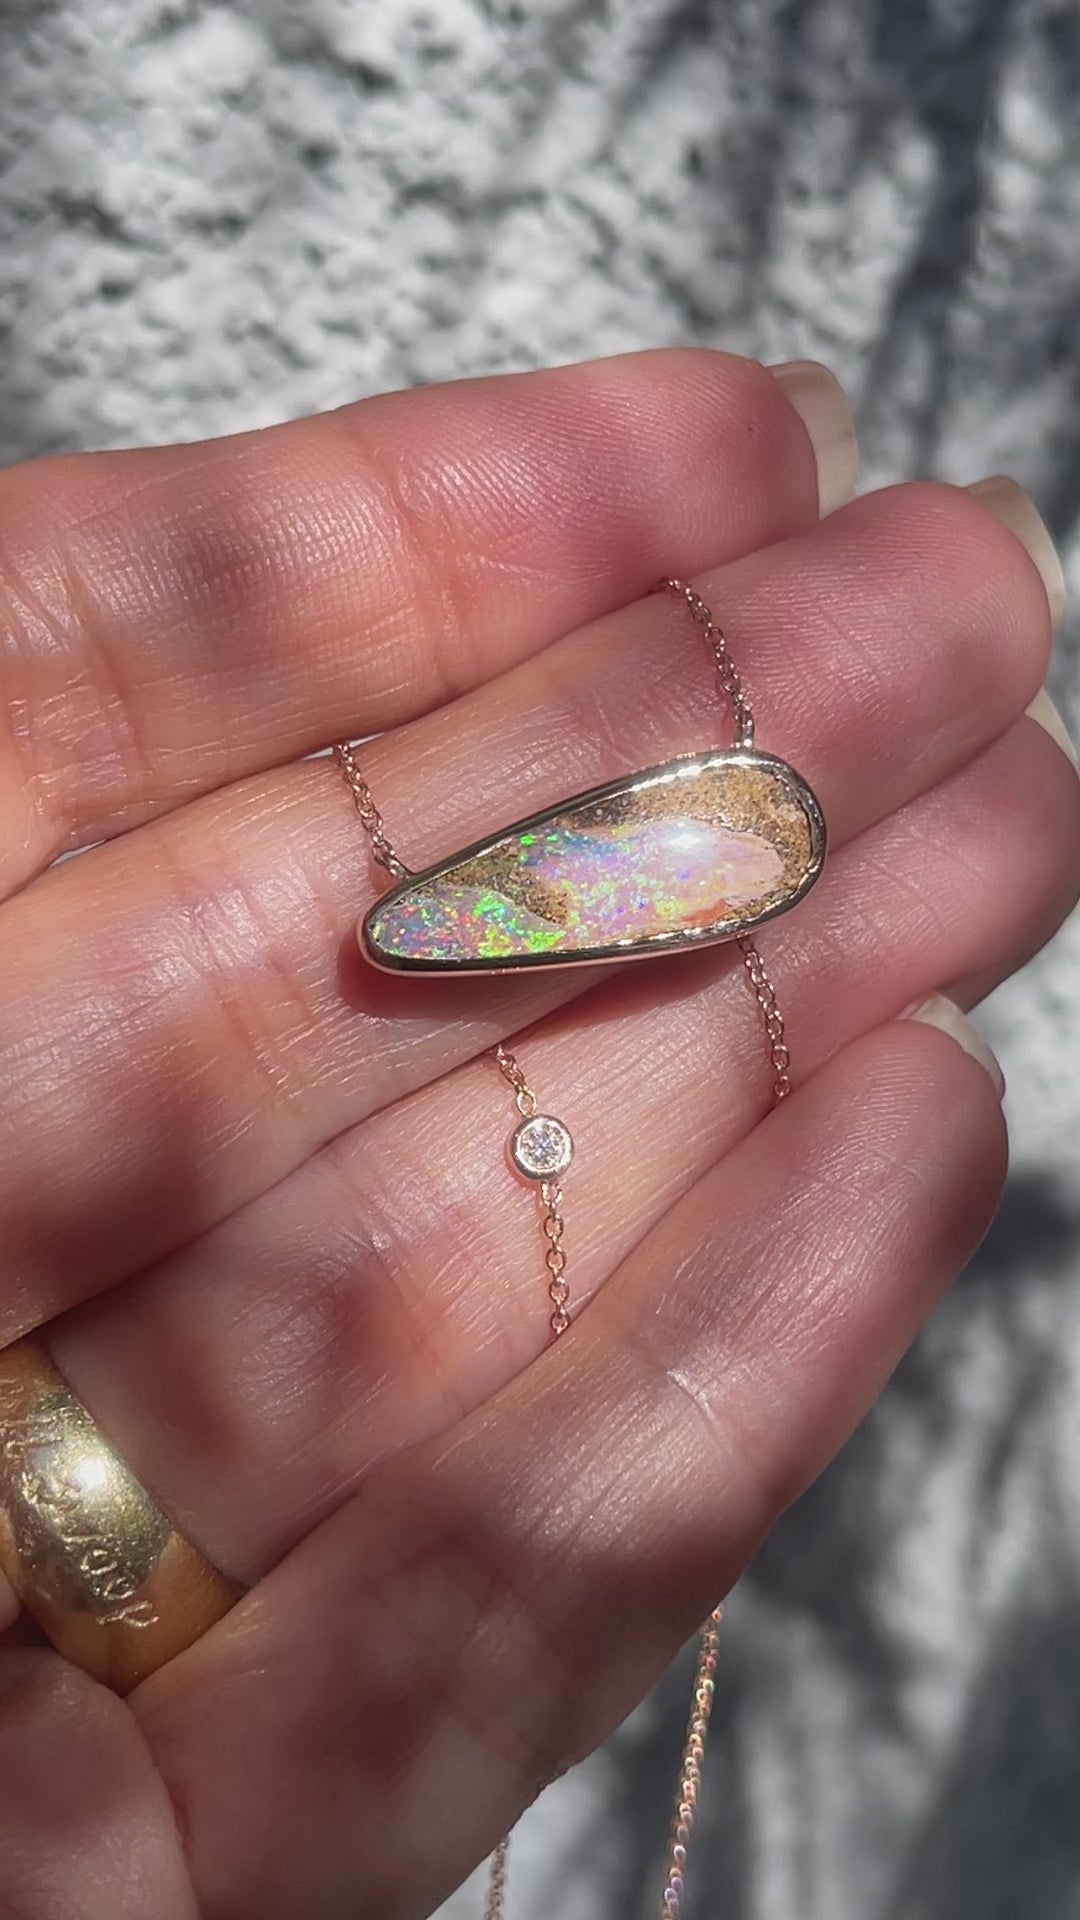 Video of an Australian Opal Necklace by NIXIN Jewelry moving in the sunlight. The rose gold opal necklace has a bezel set opal and a small diamond in the chain.